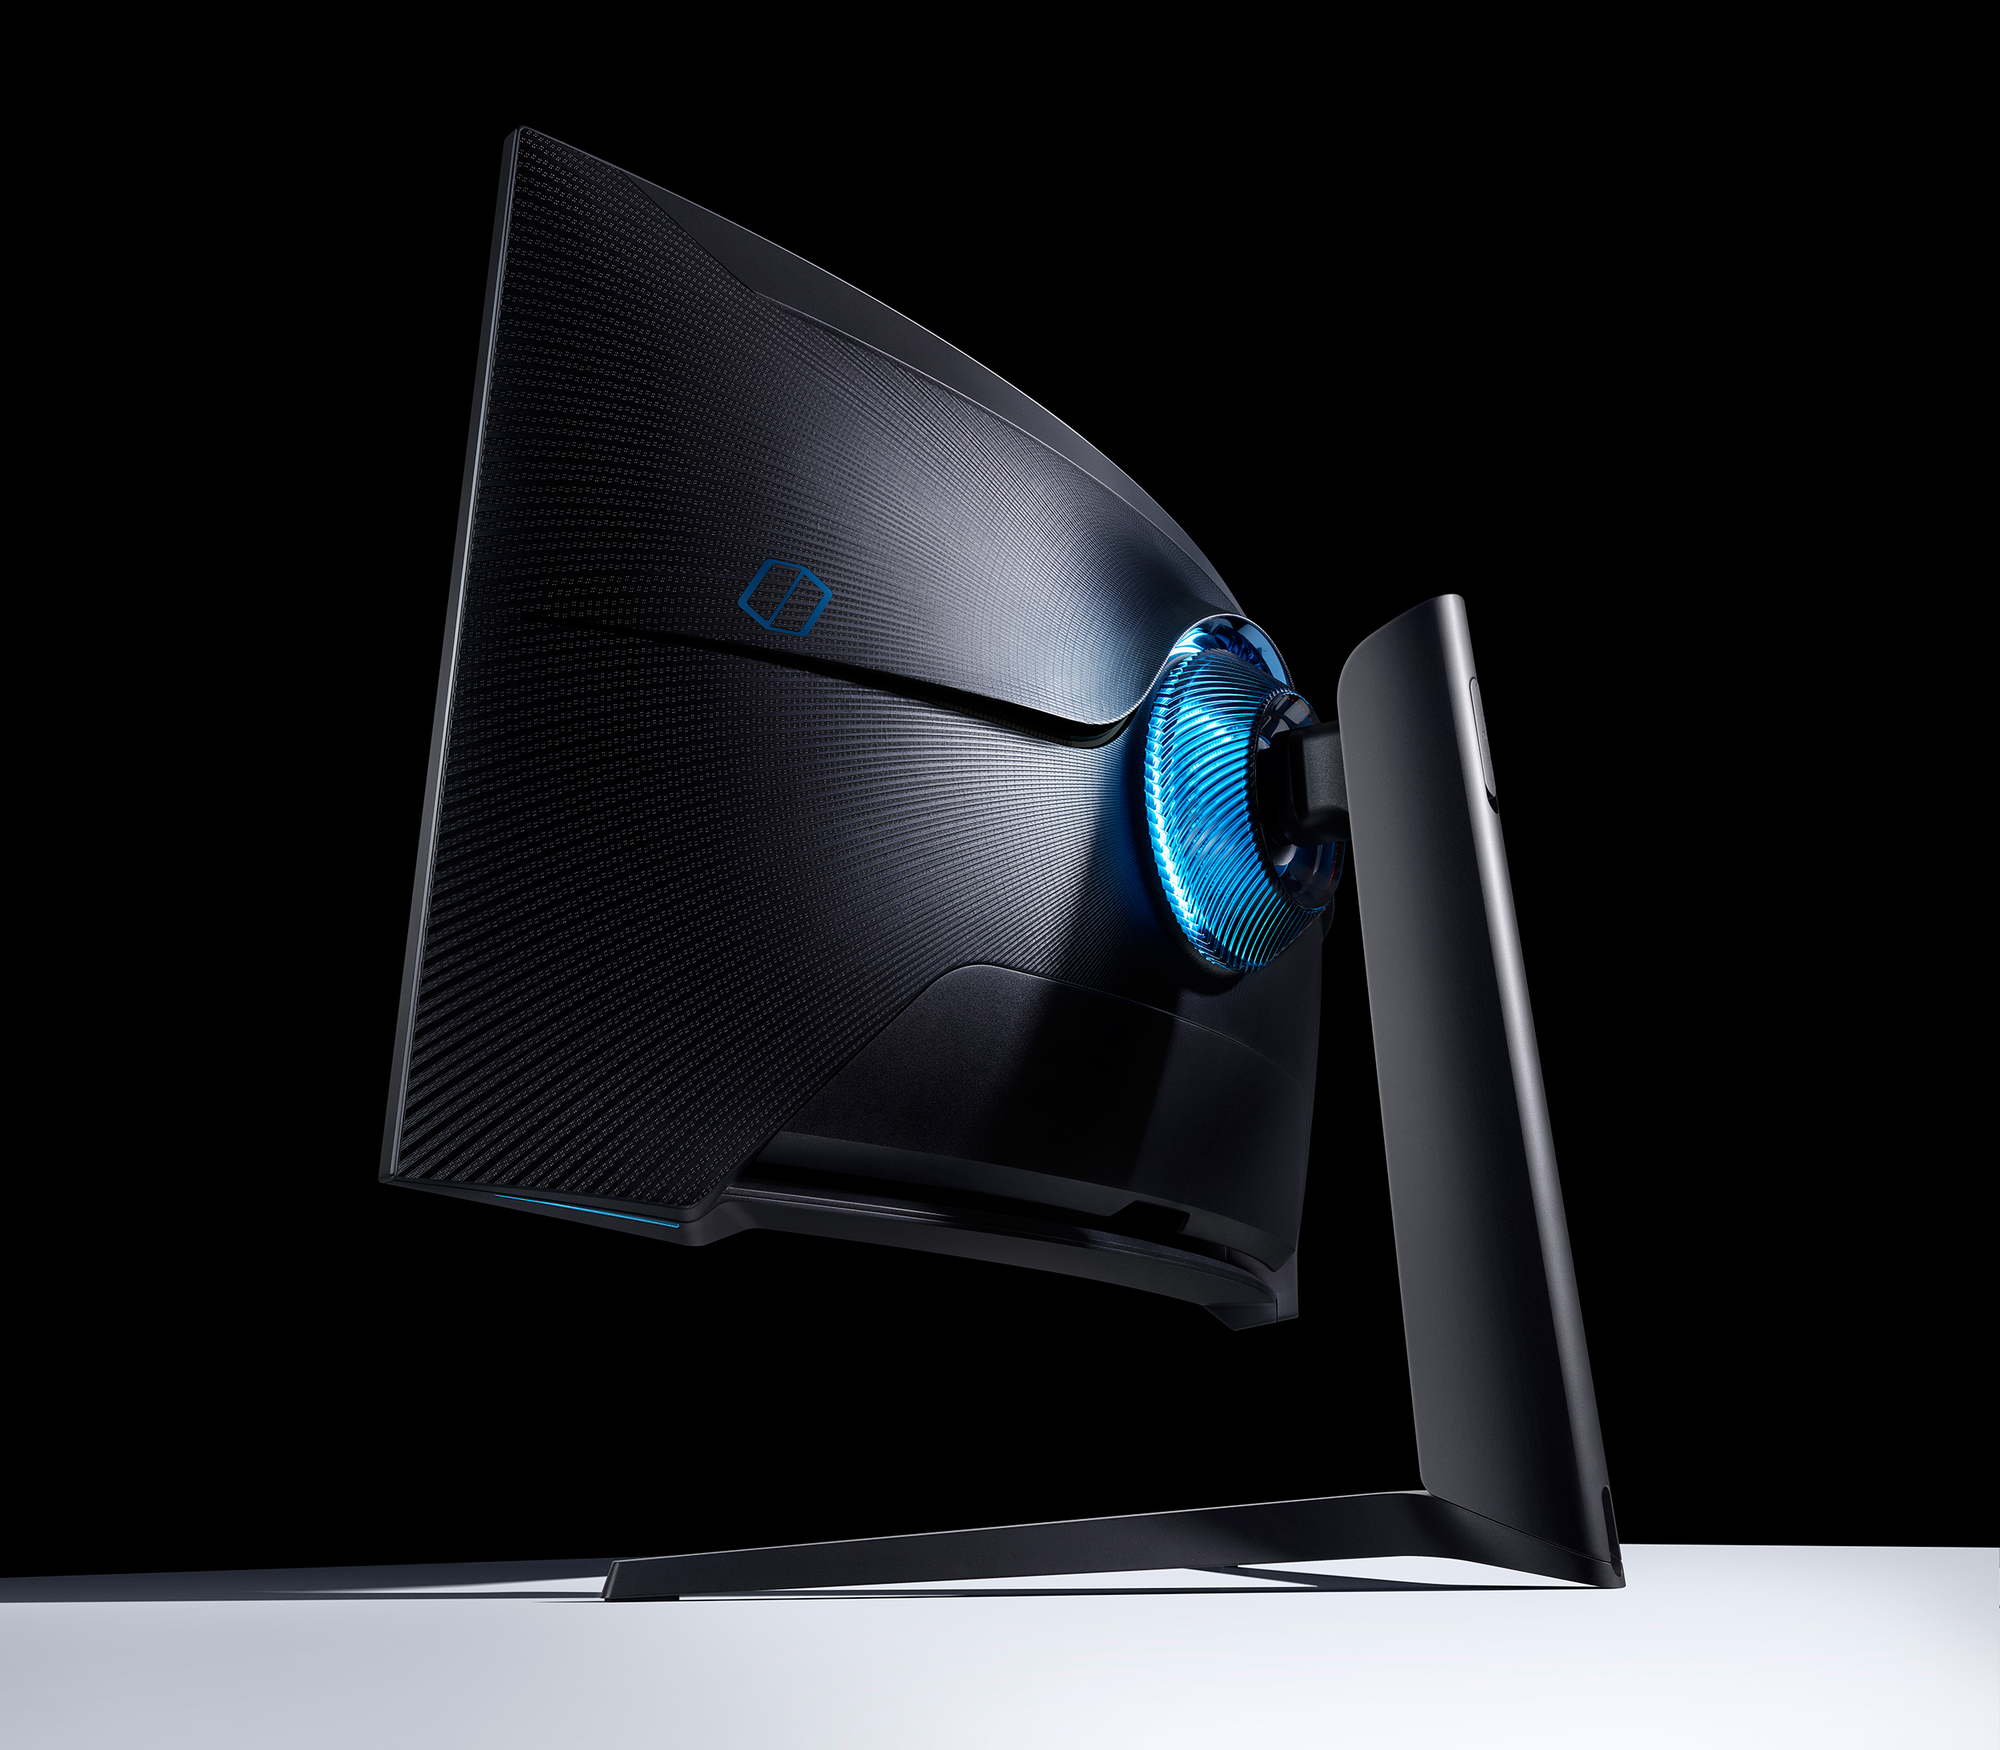 CES 2020: MSI Announces New Optix Curved Gaming Monitors 2020-Odyssey-Gaming-Monitors-G7_product1.jpg